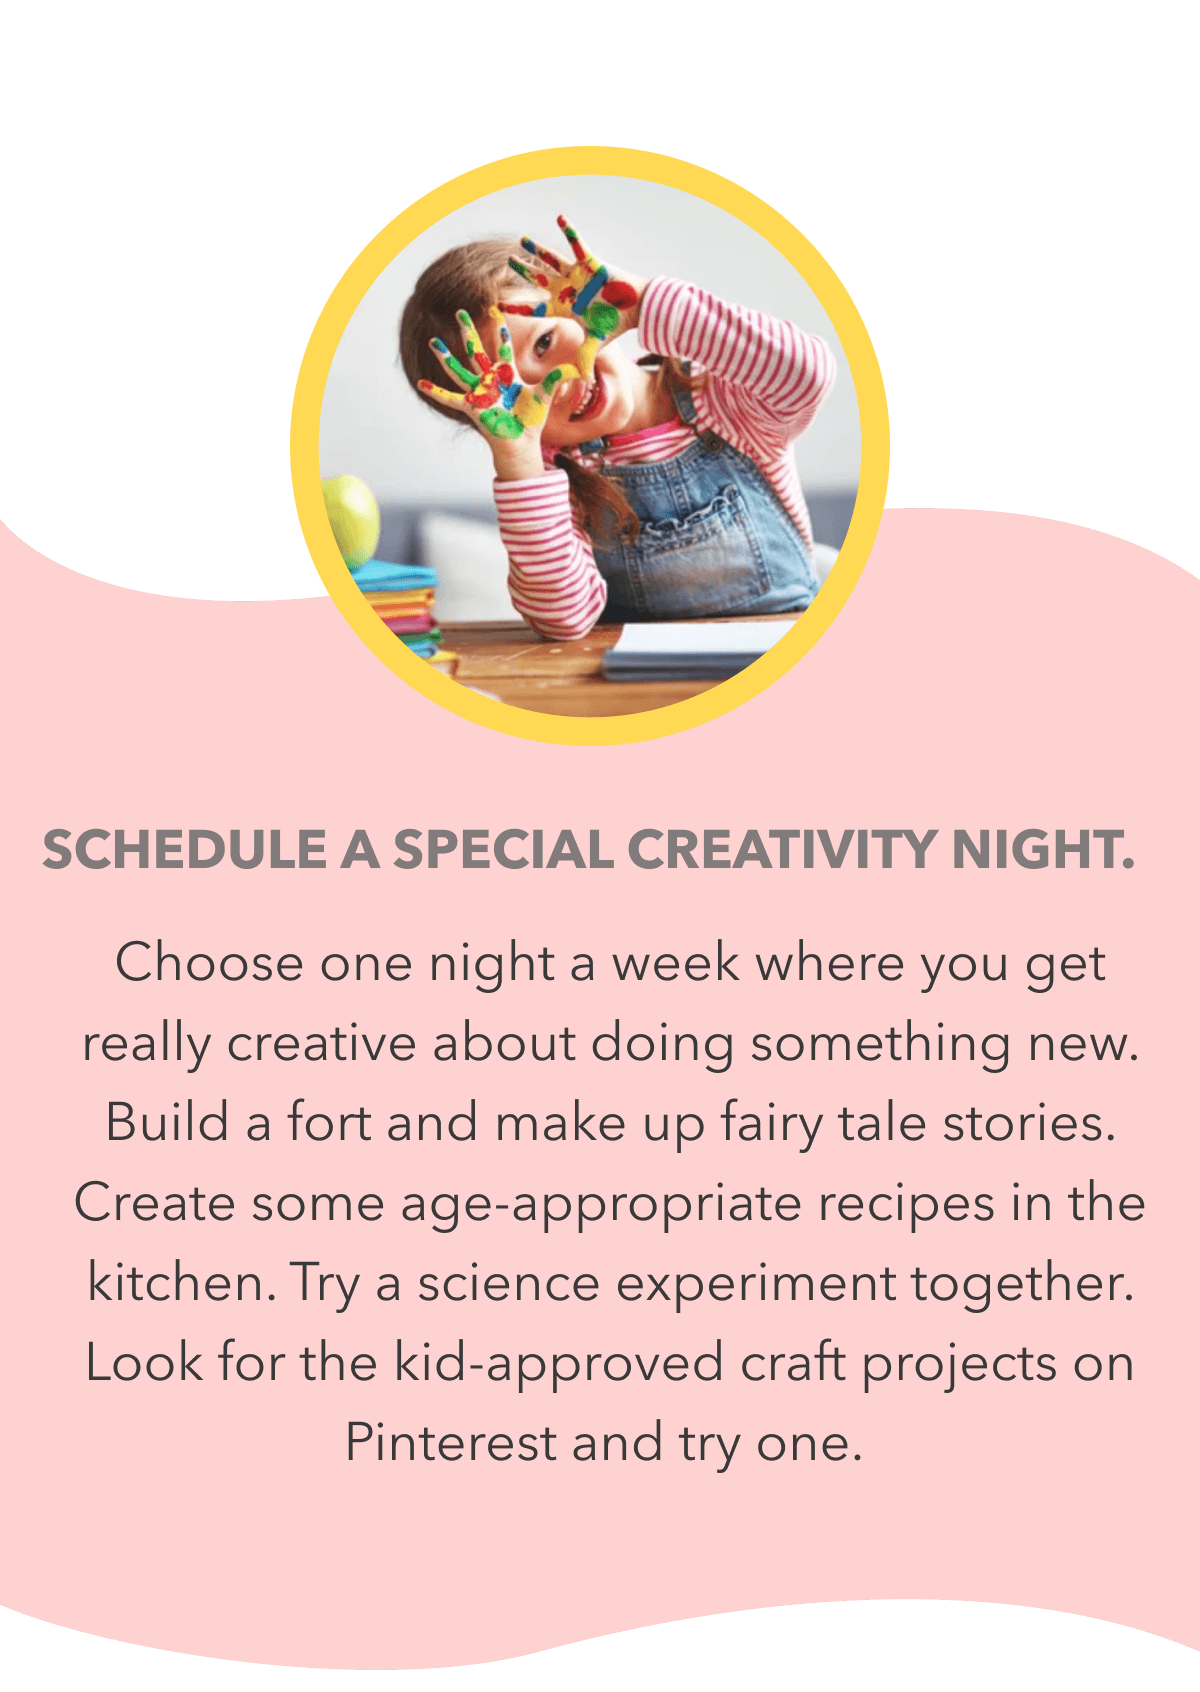 Schedule a special creativity night. Choose one night a week where you get really creative about doing something new. Build a fort and make up fairy tale stories. Create some age-appropriate recipes in the kitchen. Try a science experiment together. Look for the kid-approved craft projects on Pinterest and try one.